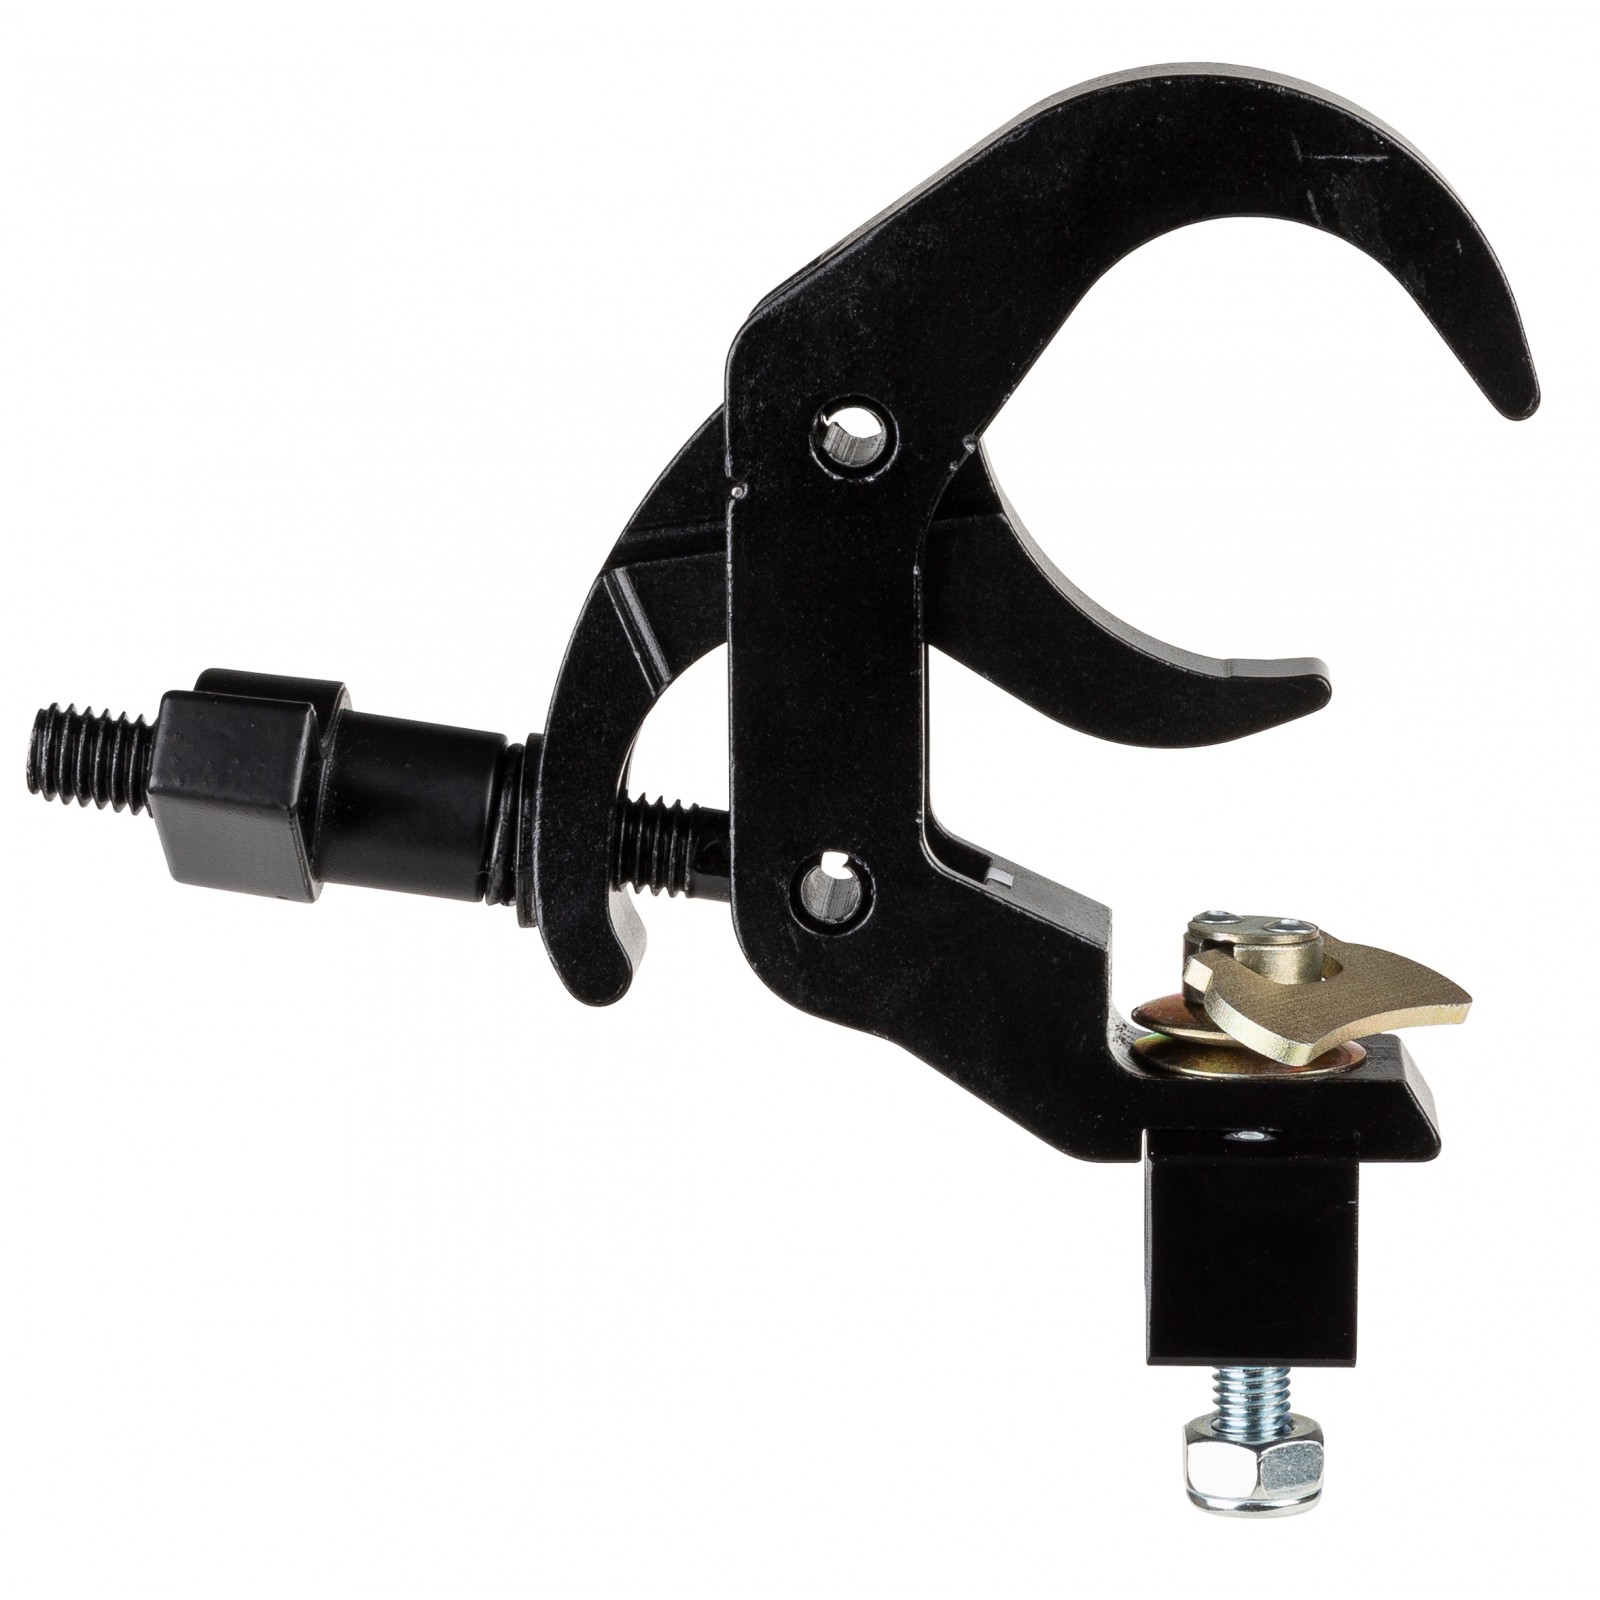 ABEST 2 Support aérographe clamp-on table Mount hobby nouveau kit